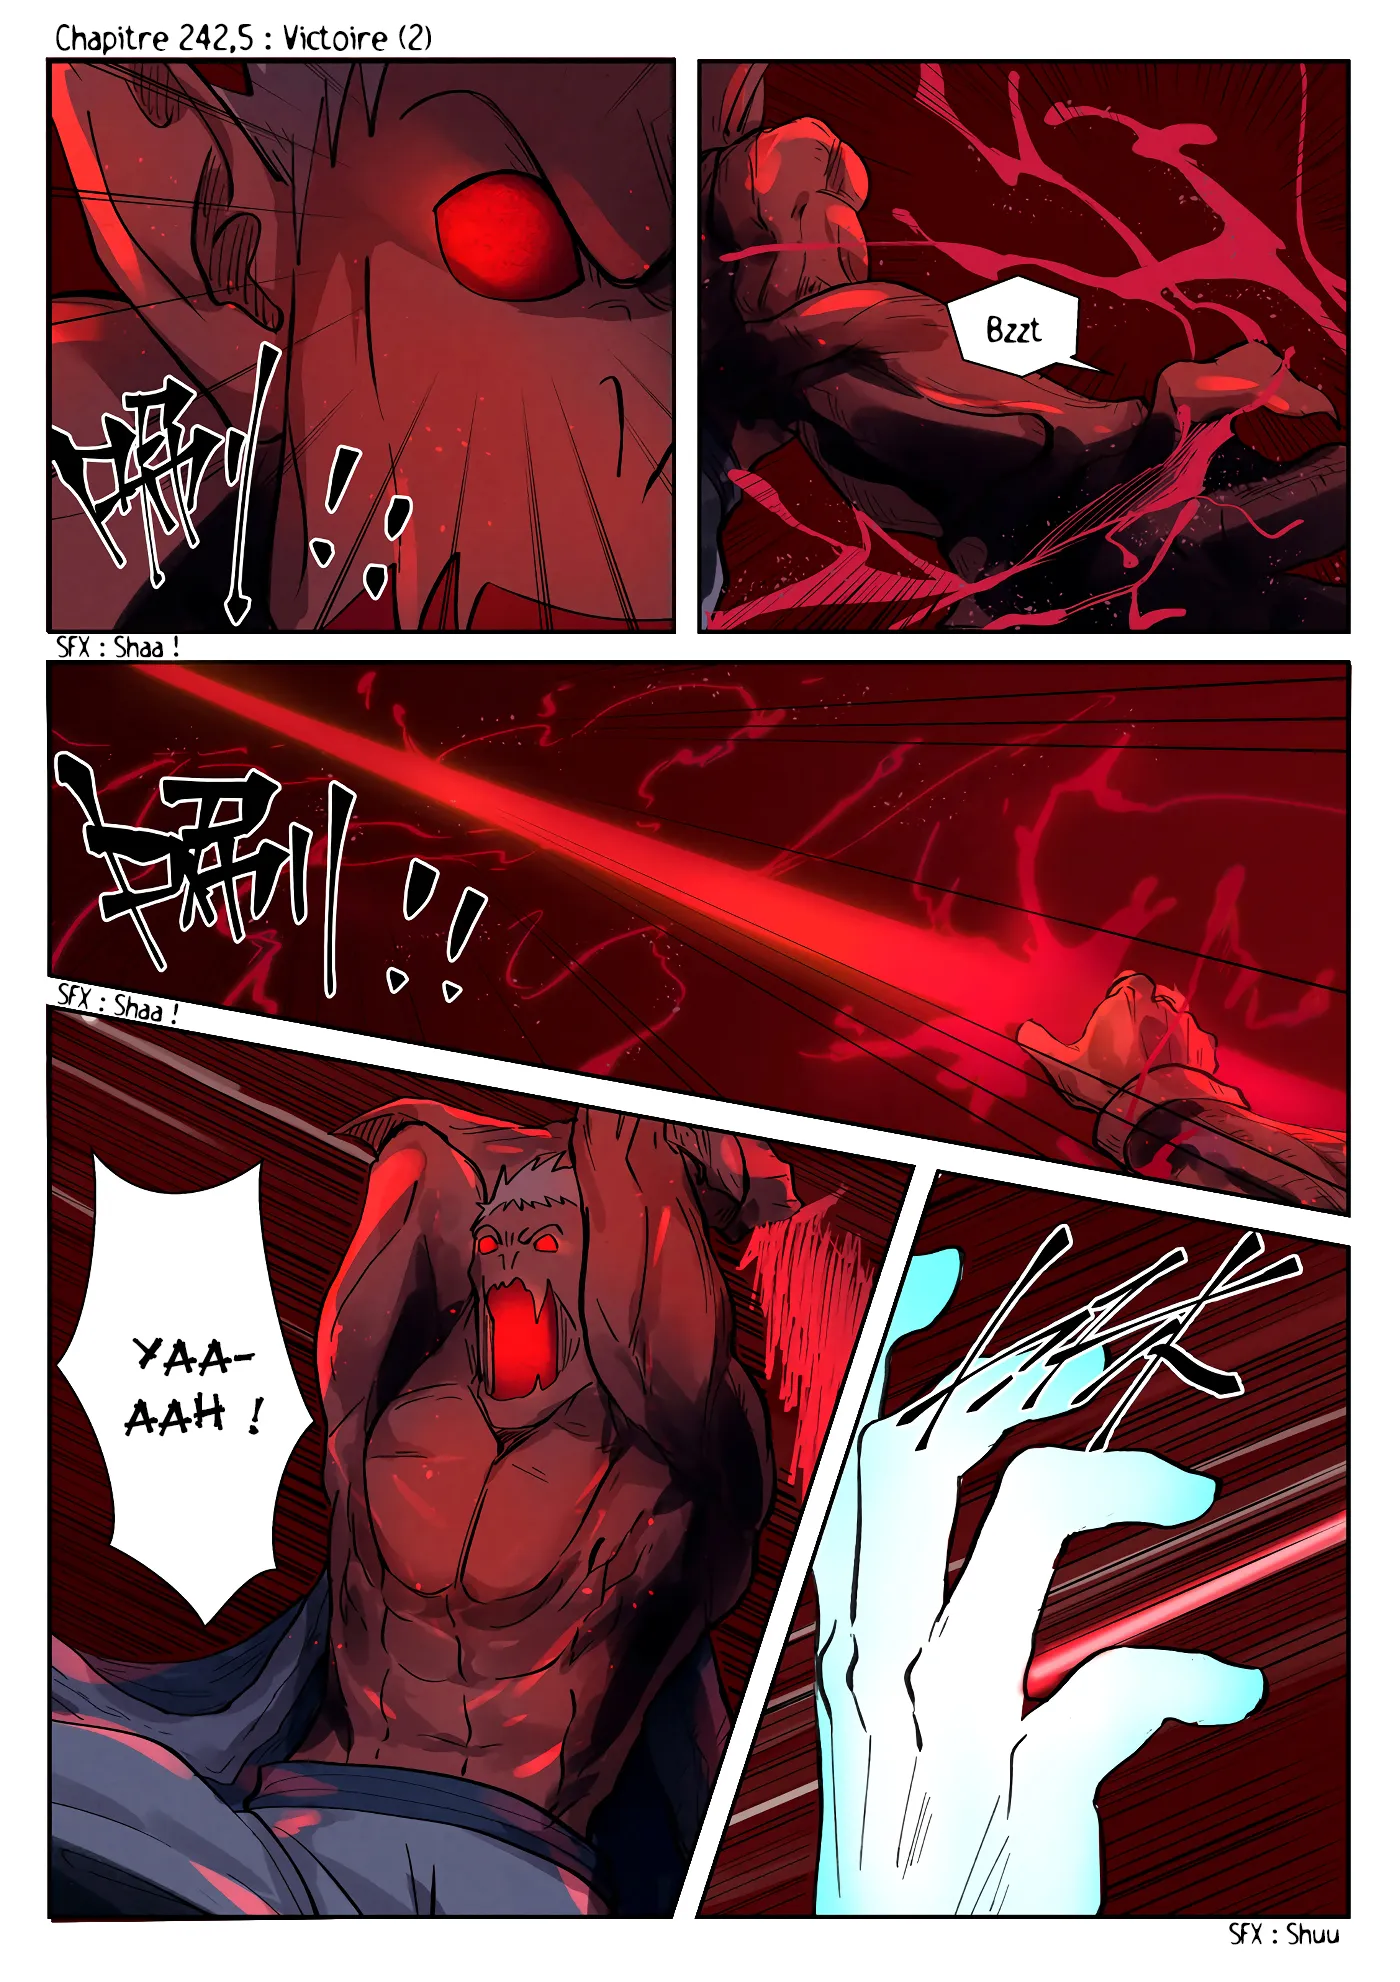 Tales Of Demons And Gods: Chapter chapitre-242.5 - Page 1